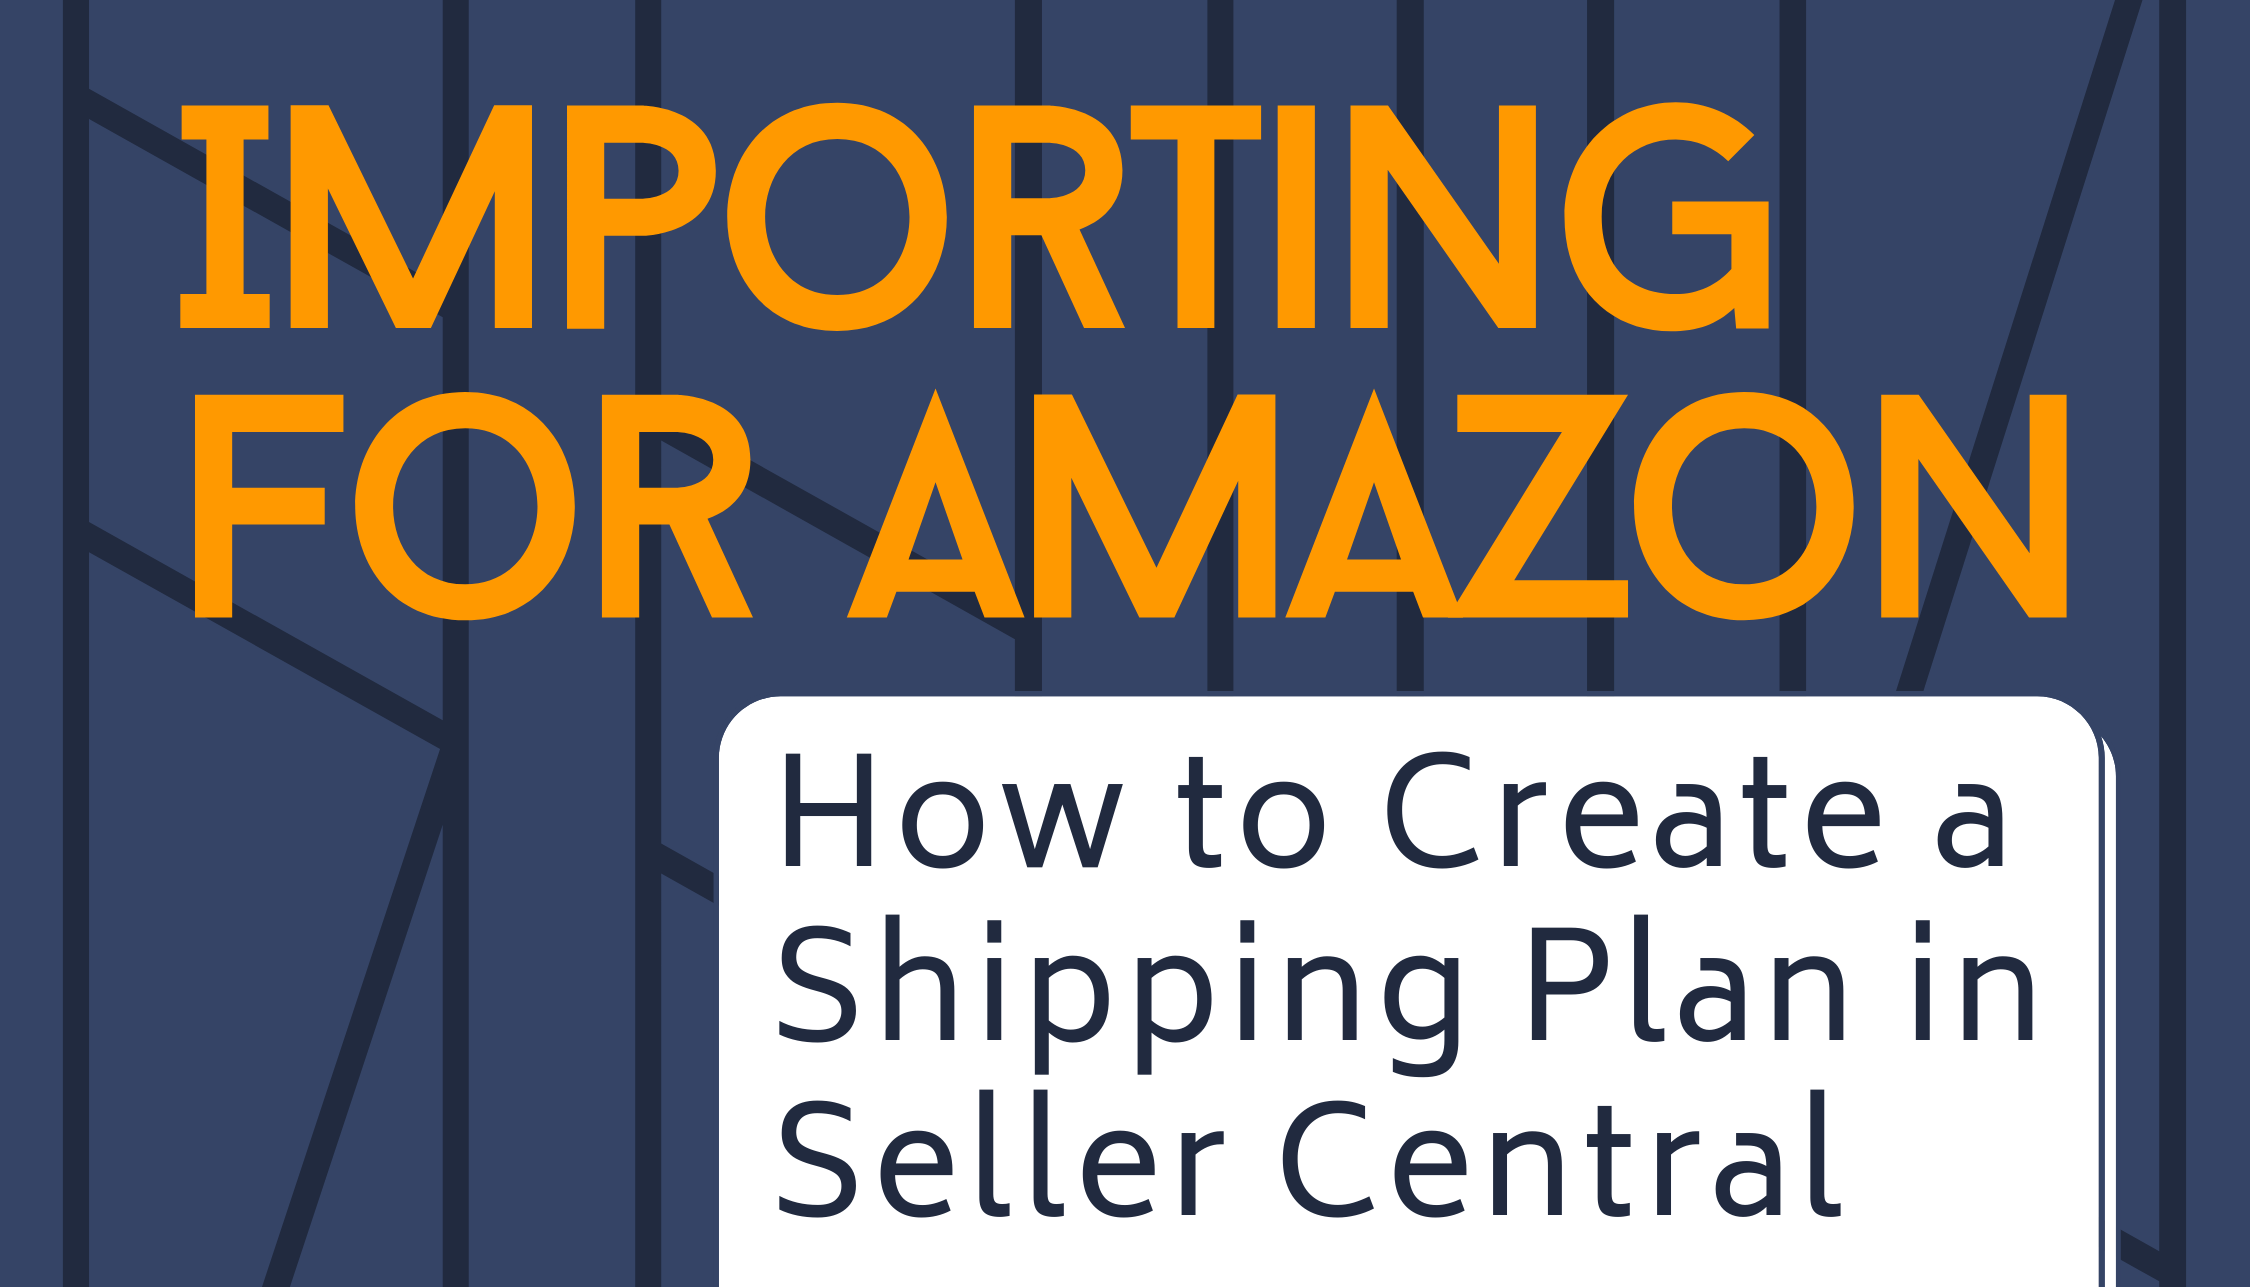 Importing for Amazon: How to Create a Shipping Plan in Seller Central